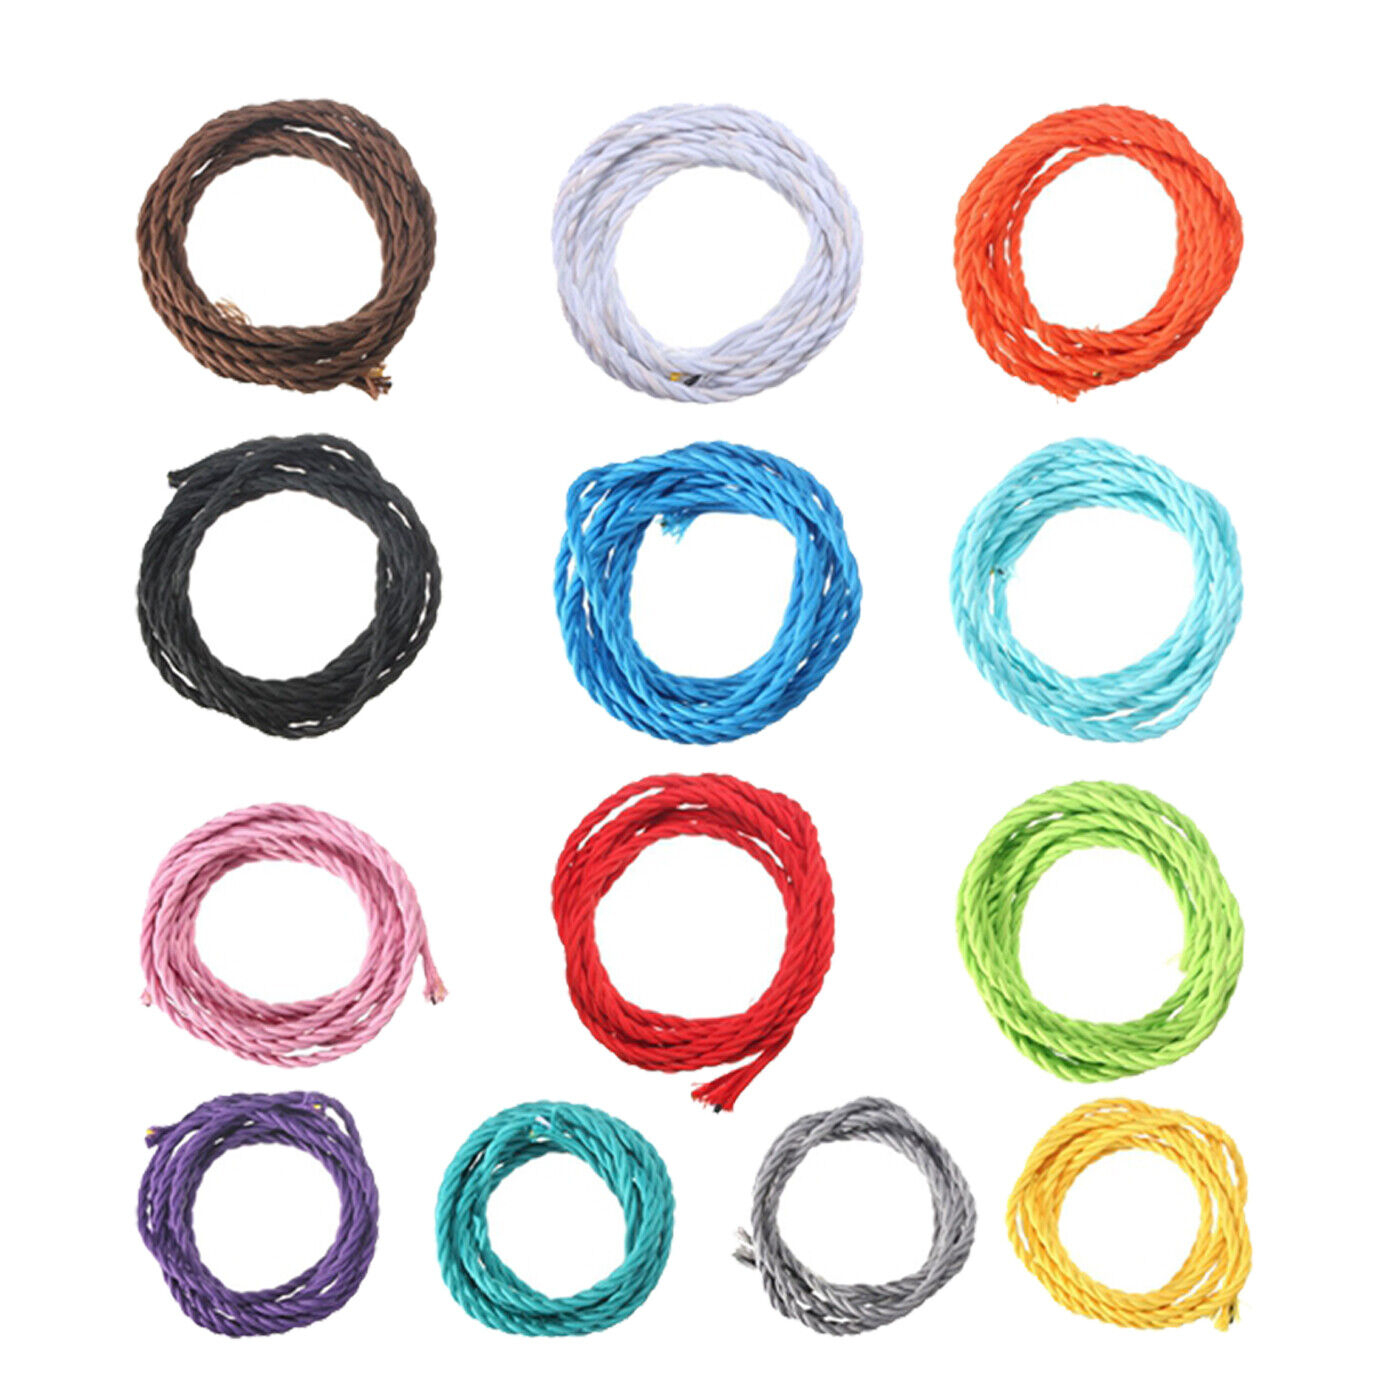 5M 2 core Twisted fabric cable.JPG